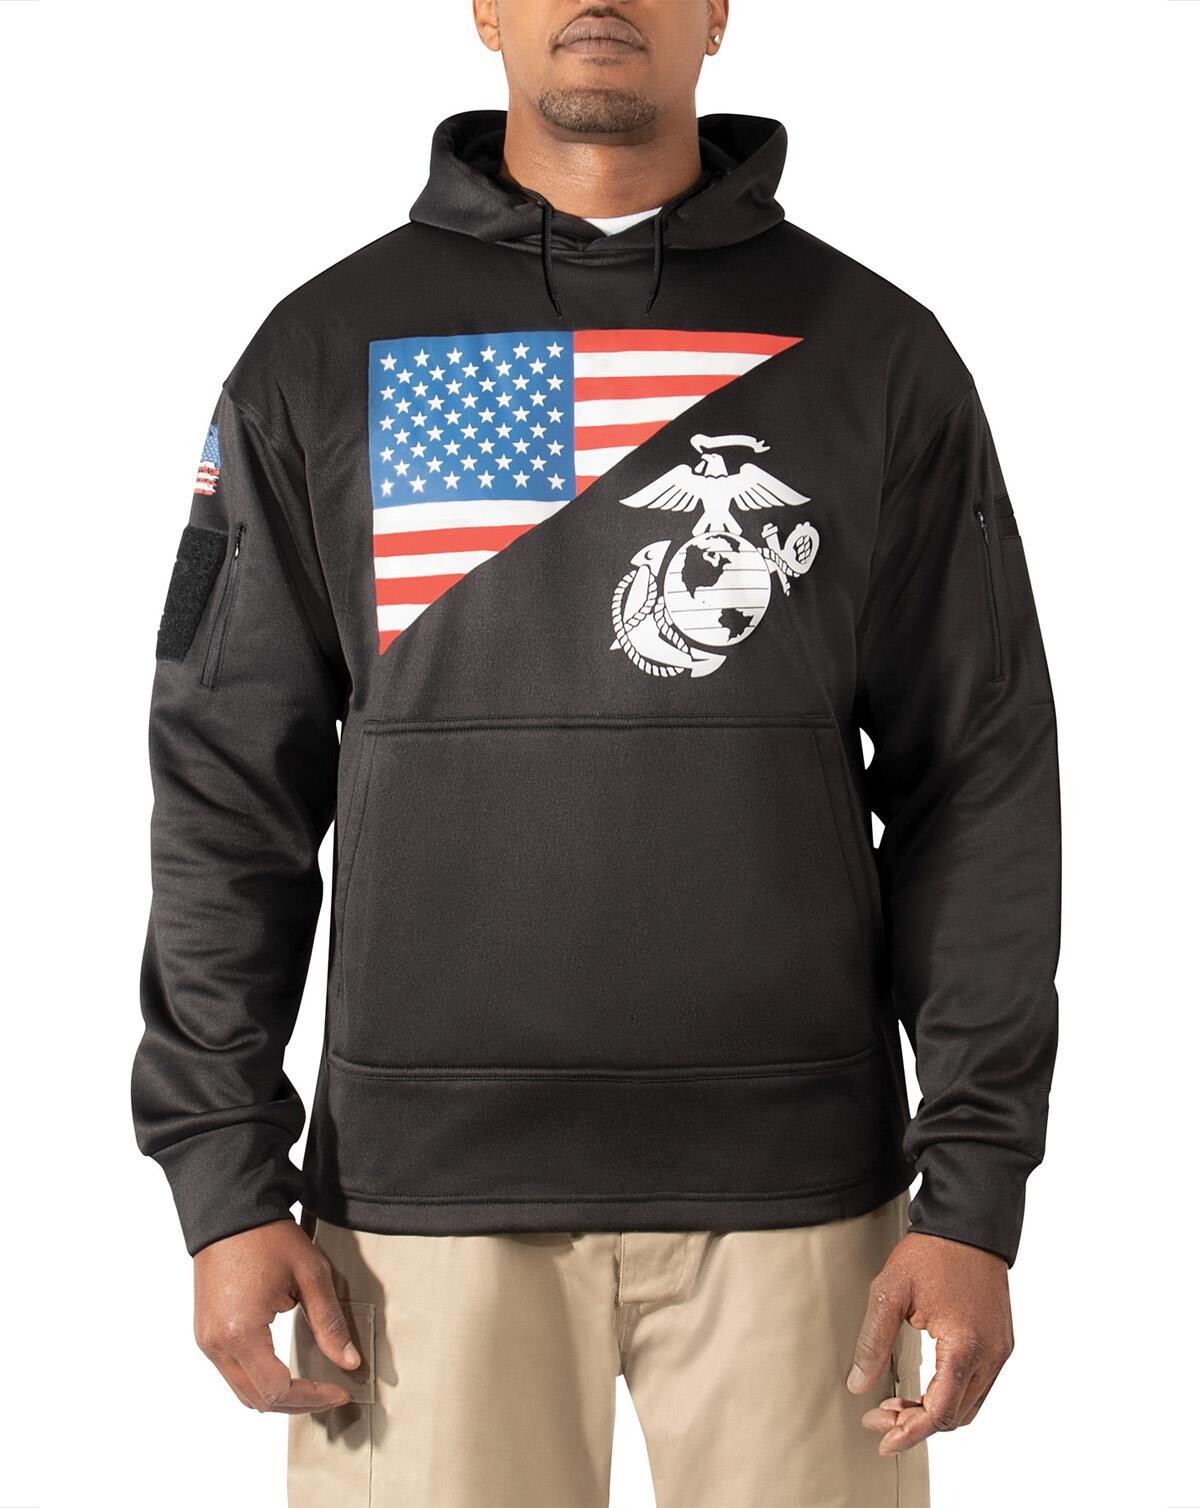 Rothco US Flag Concealed Carry Hoodie (Sort, 2XL)